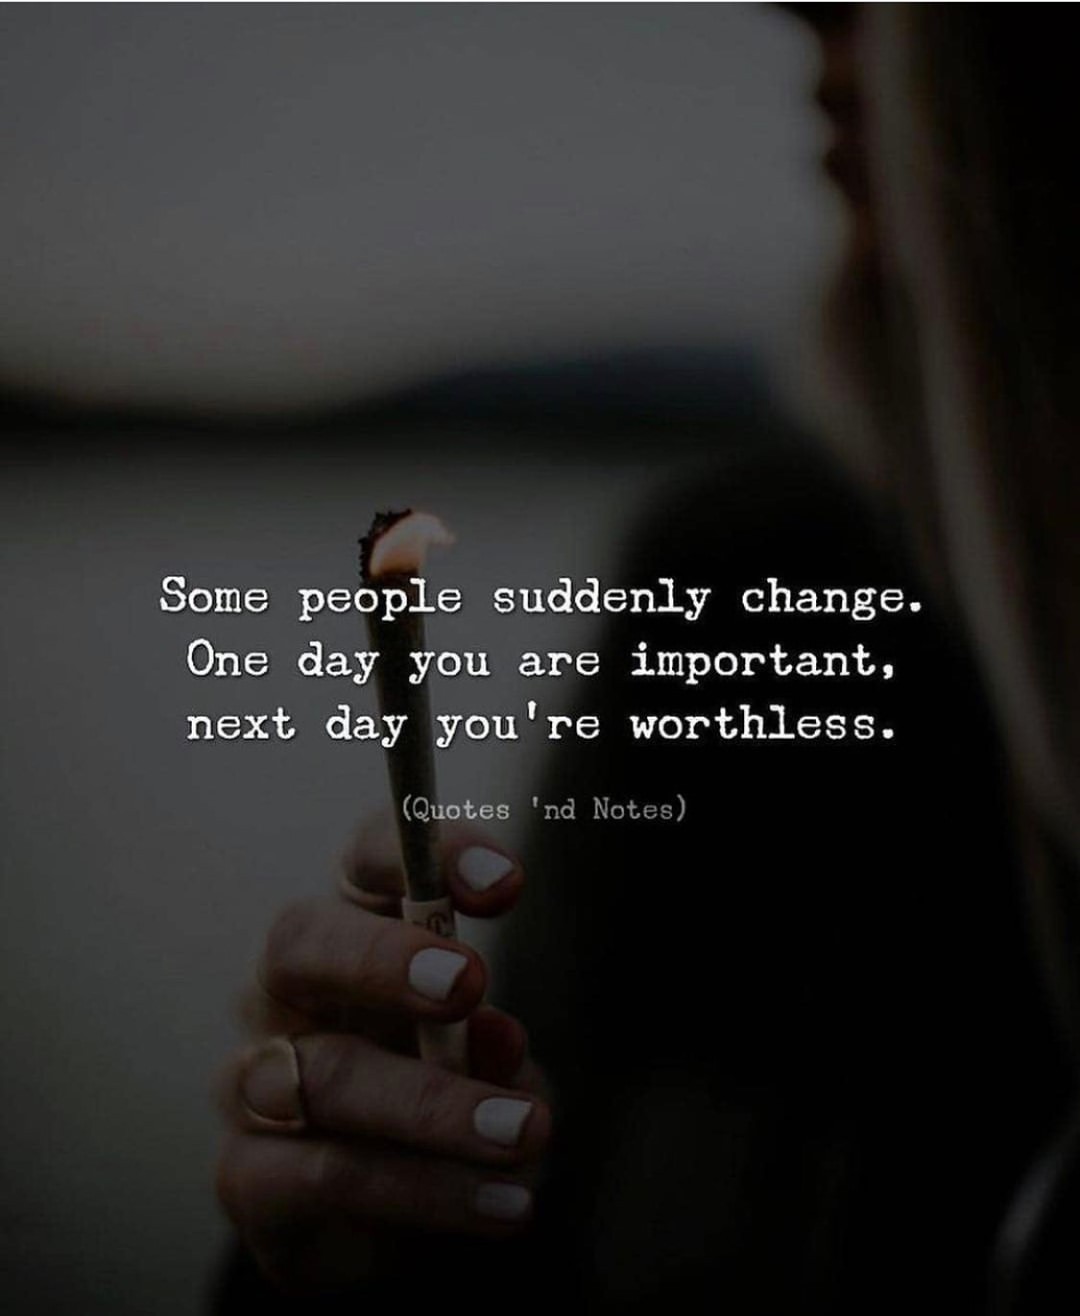 Some people suddenly change. One day you are important, next day you're worthless.